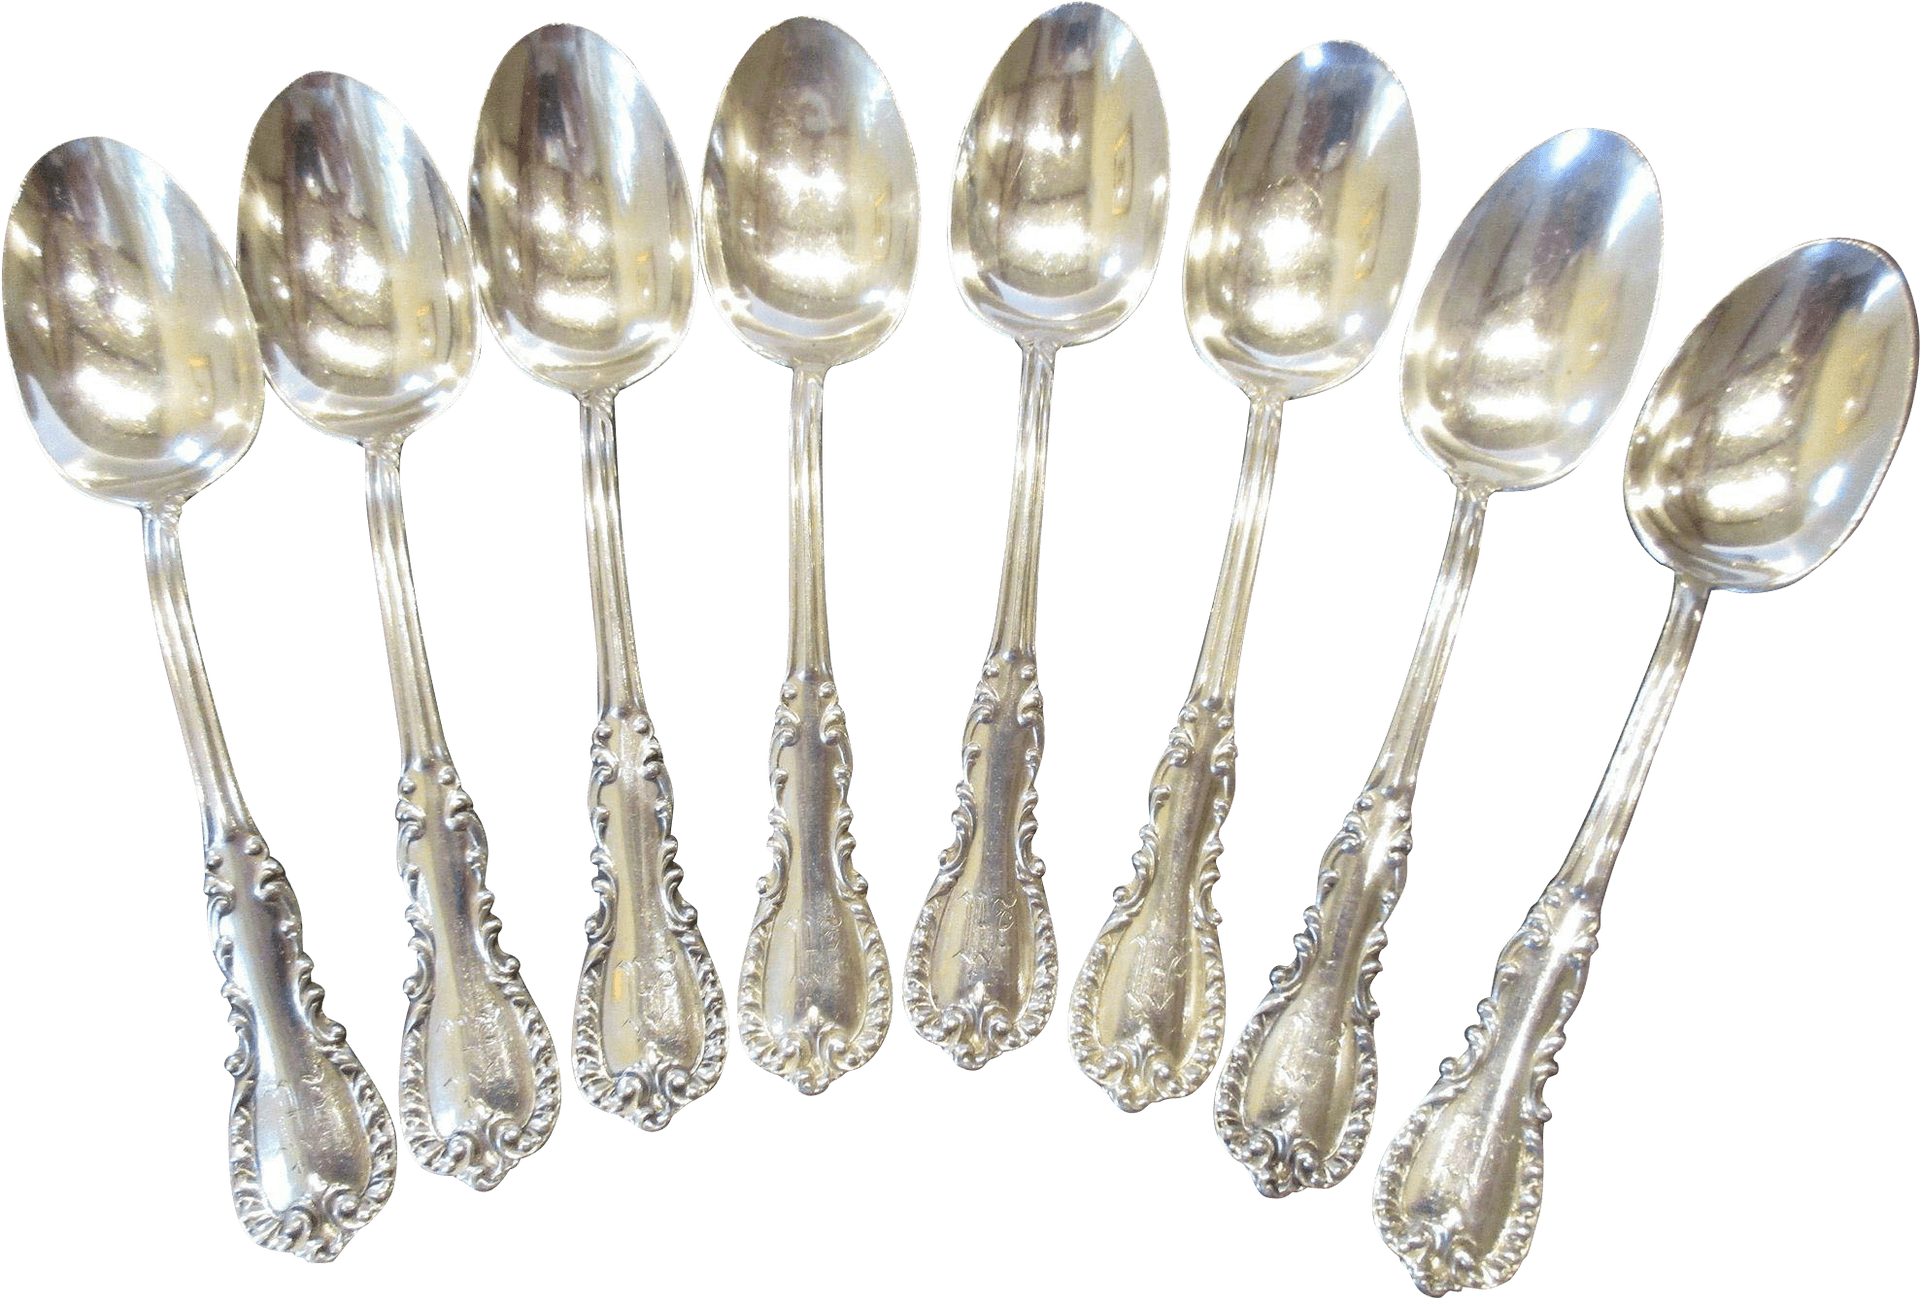 Silver Antique Spoons Collection PNG